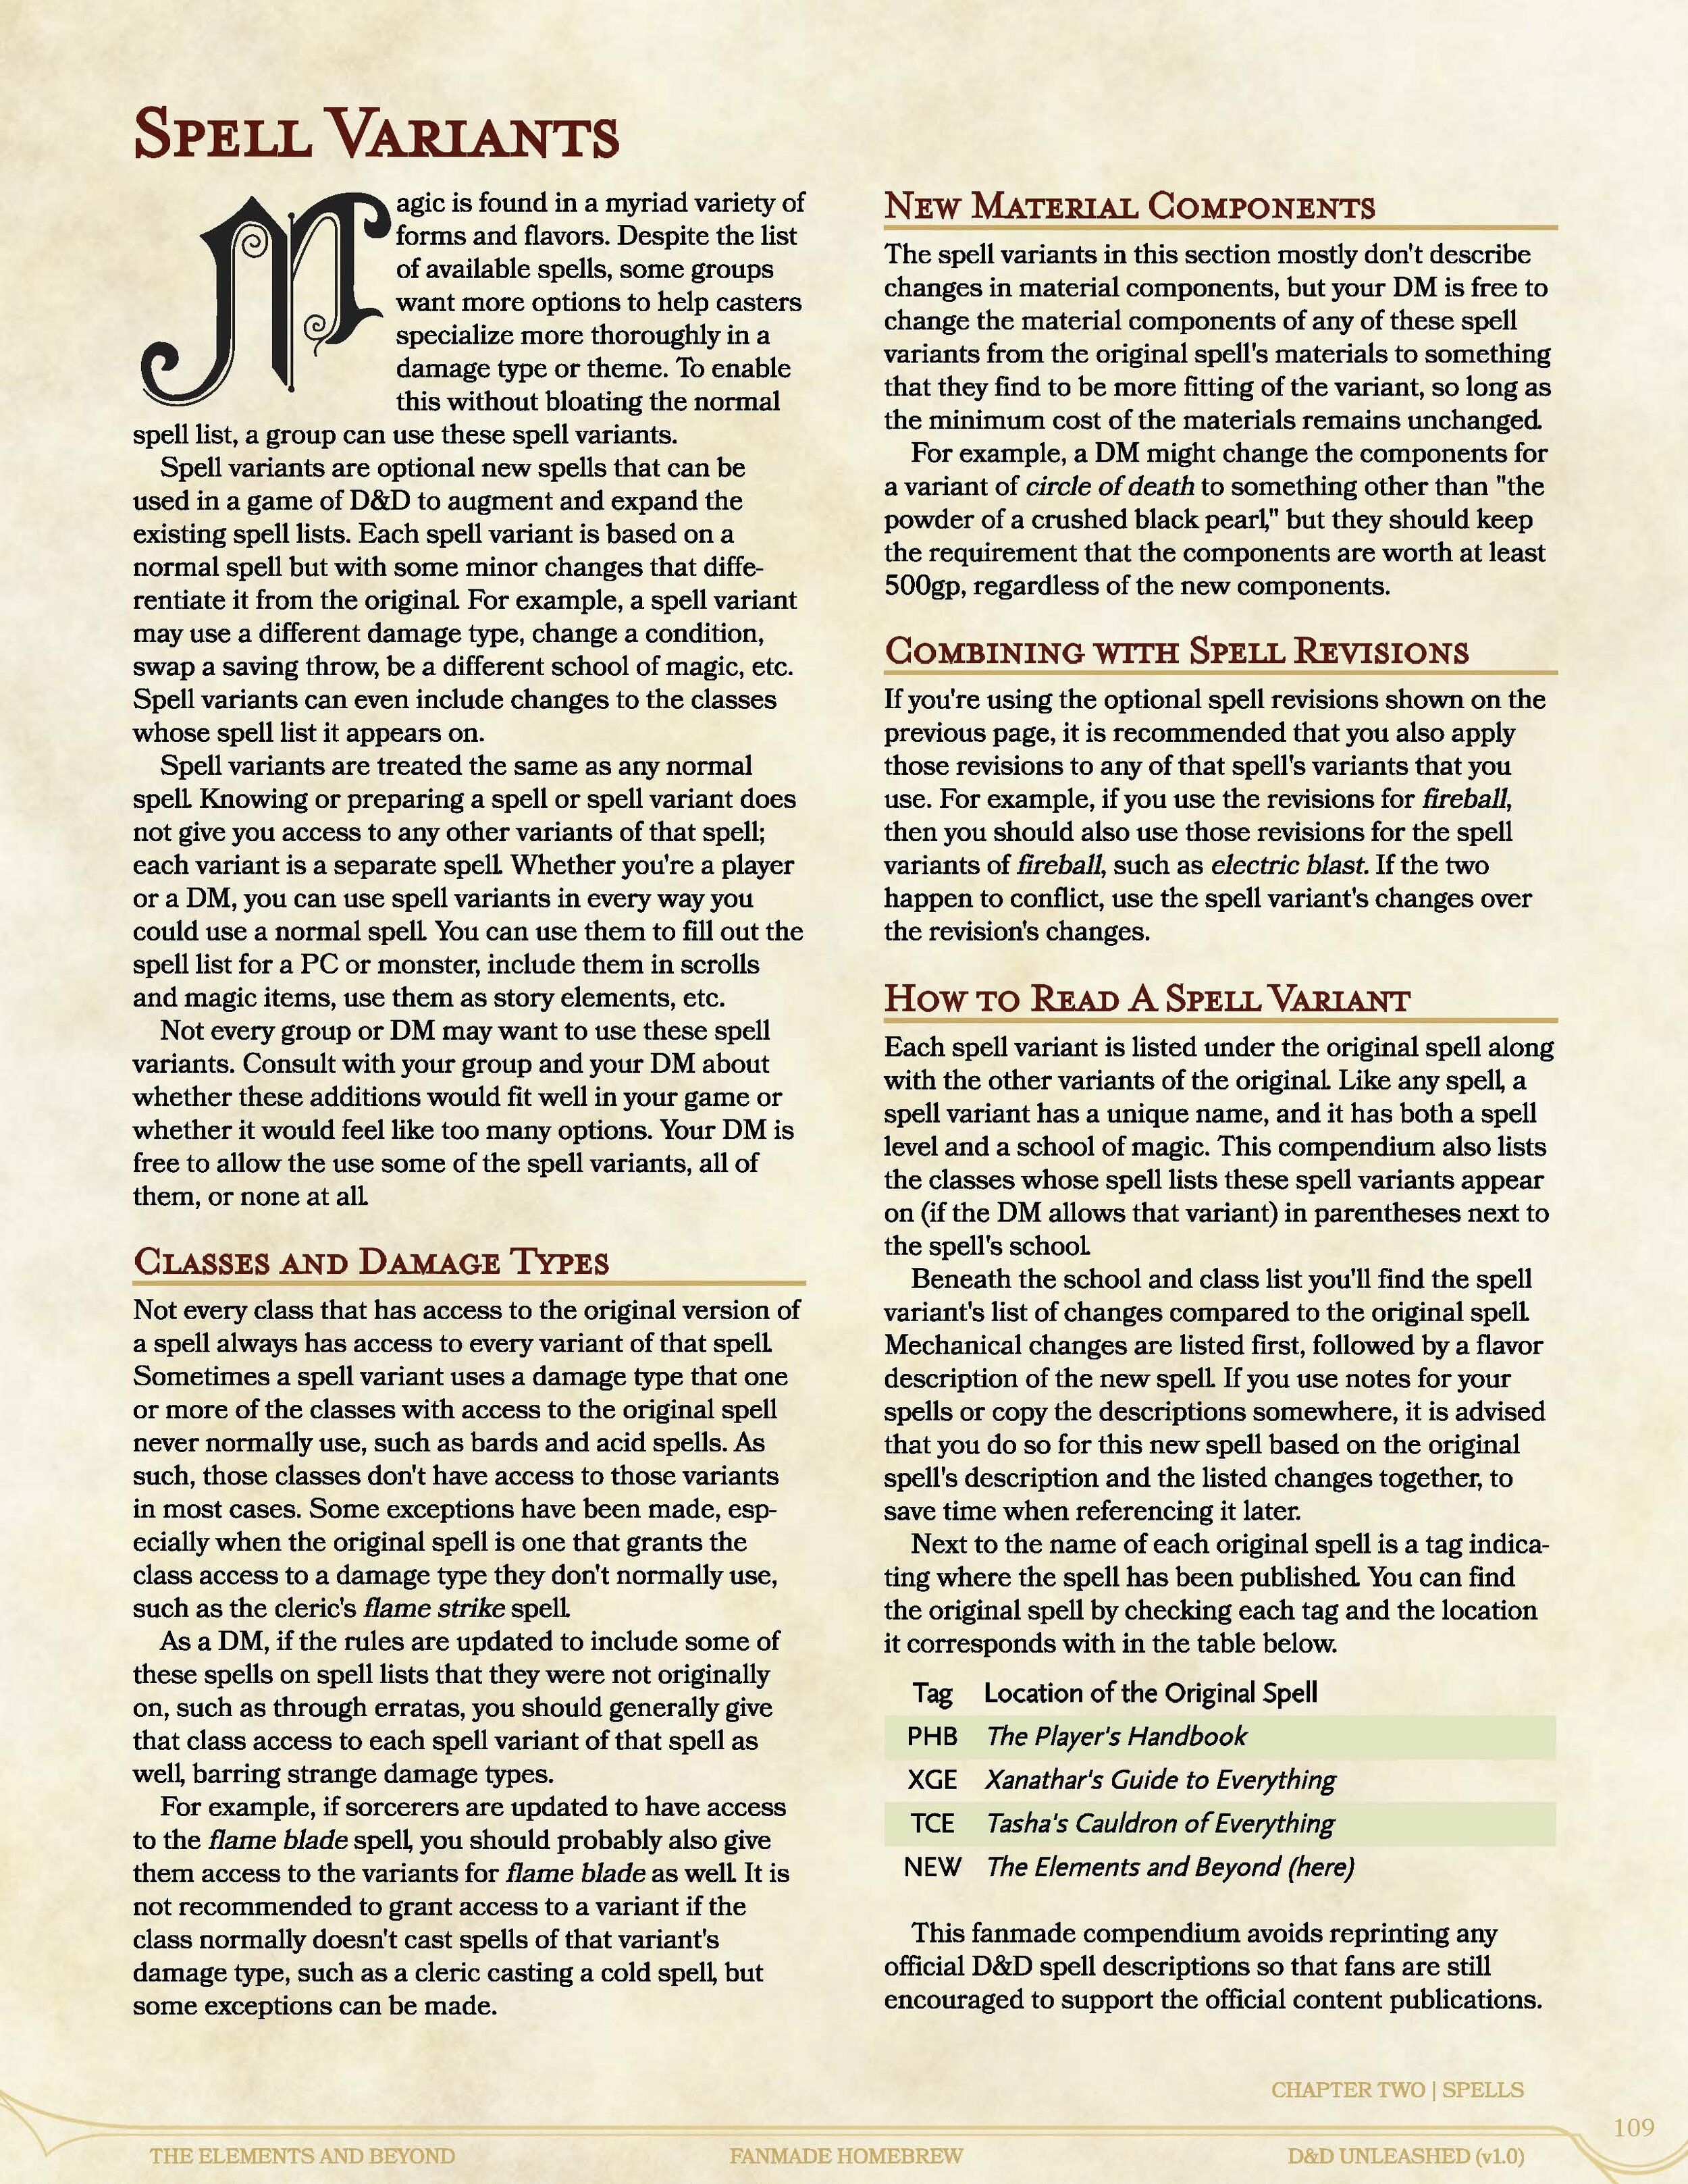 D&D Unleashed Compendium -- The Elements and Beyond (v1p0)_Page_109.jpg